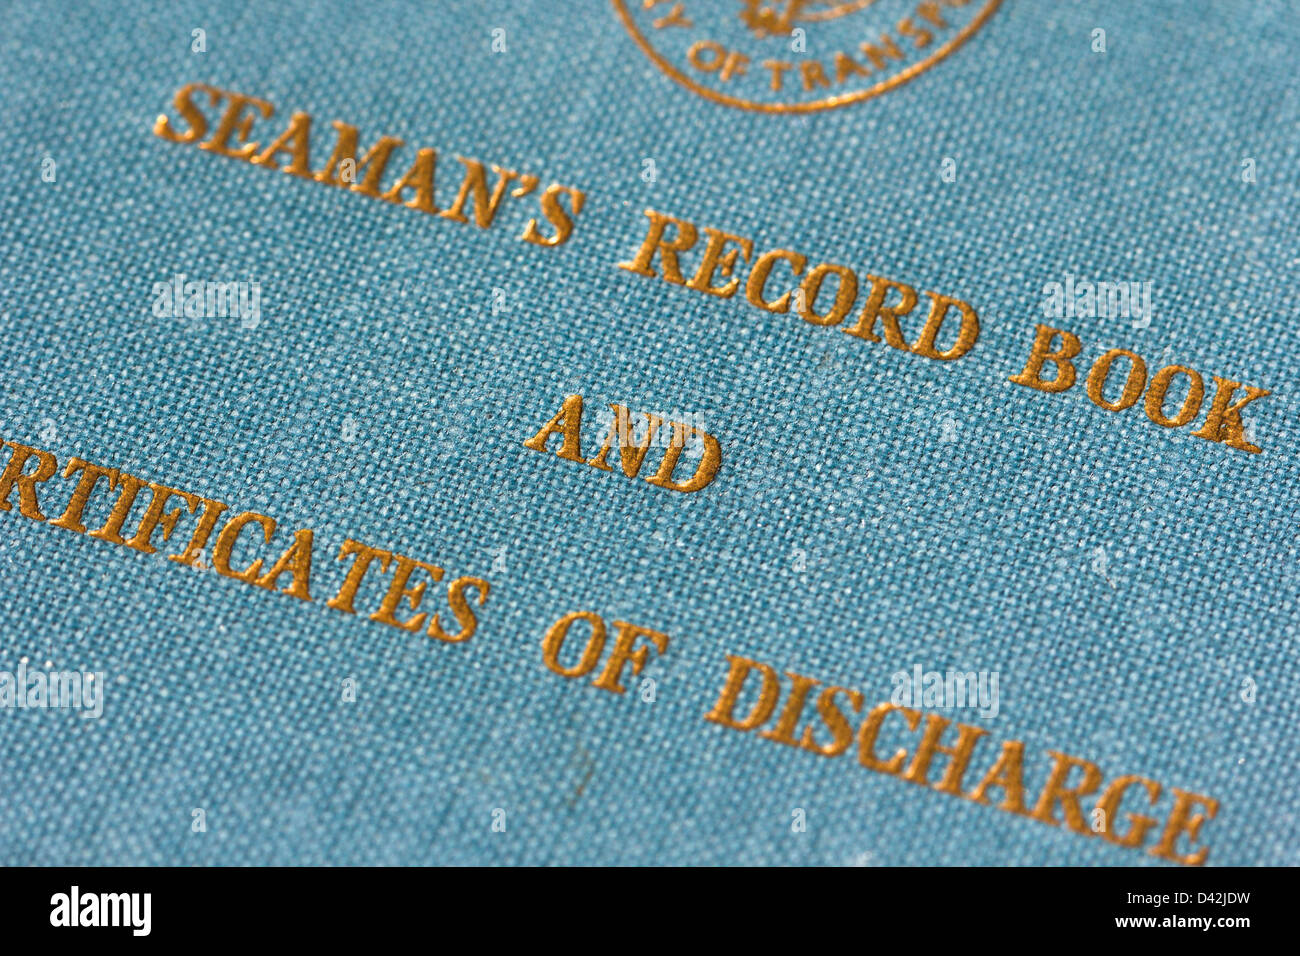 Seaman's record book, certificates of Discharge. Identity book for seamen. UK Stock Photo